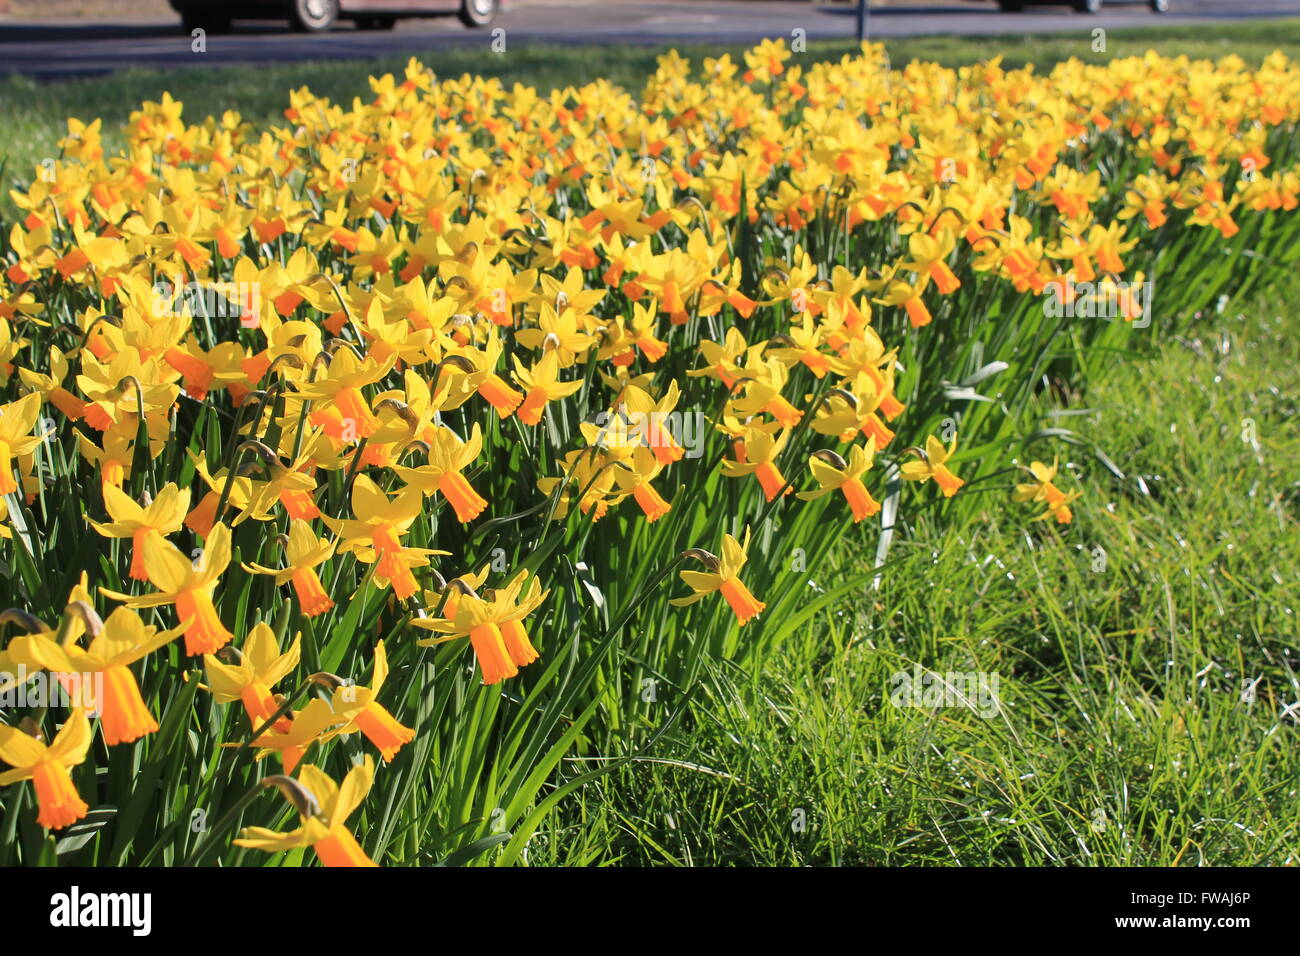 Daffodils: a bright yellow daffodil welcome to spring Stock Photo